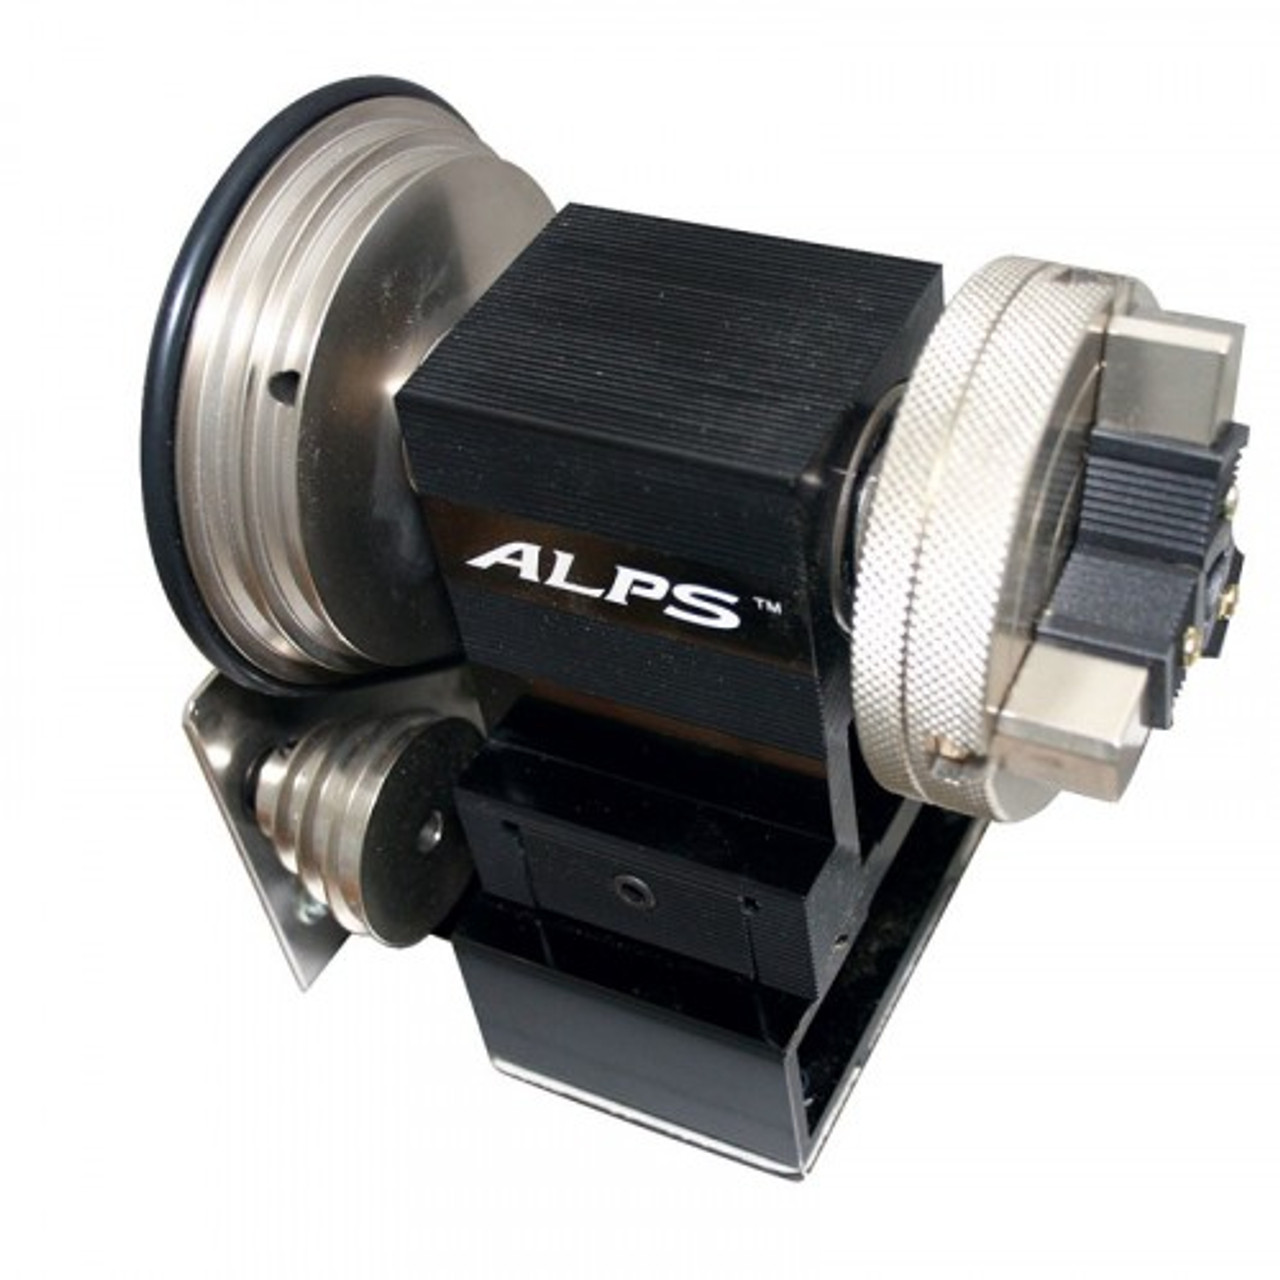 SALE! 20% off ALPS Rod Wrapping Machines Sale ends May 31st, or until  stocks last. Standard ALPS rod lathe - $391.60 Upgraded ALPS rod lathe  with